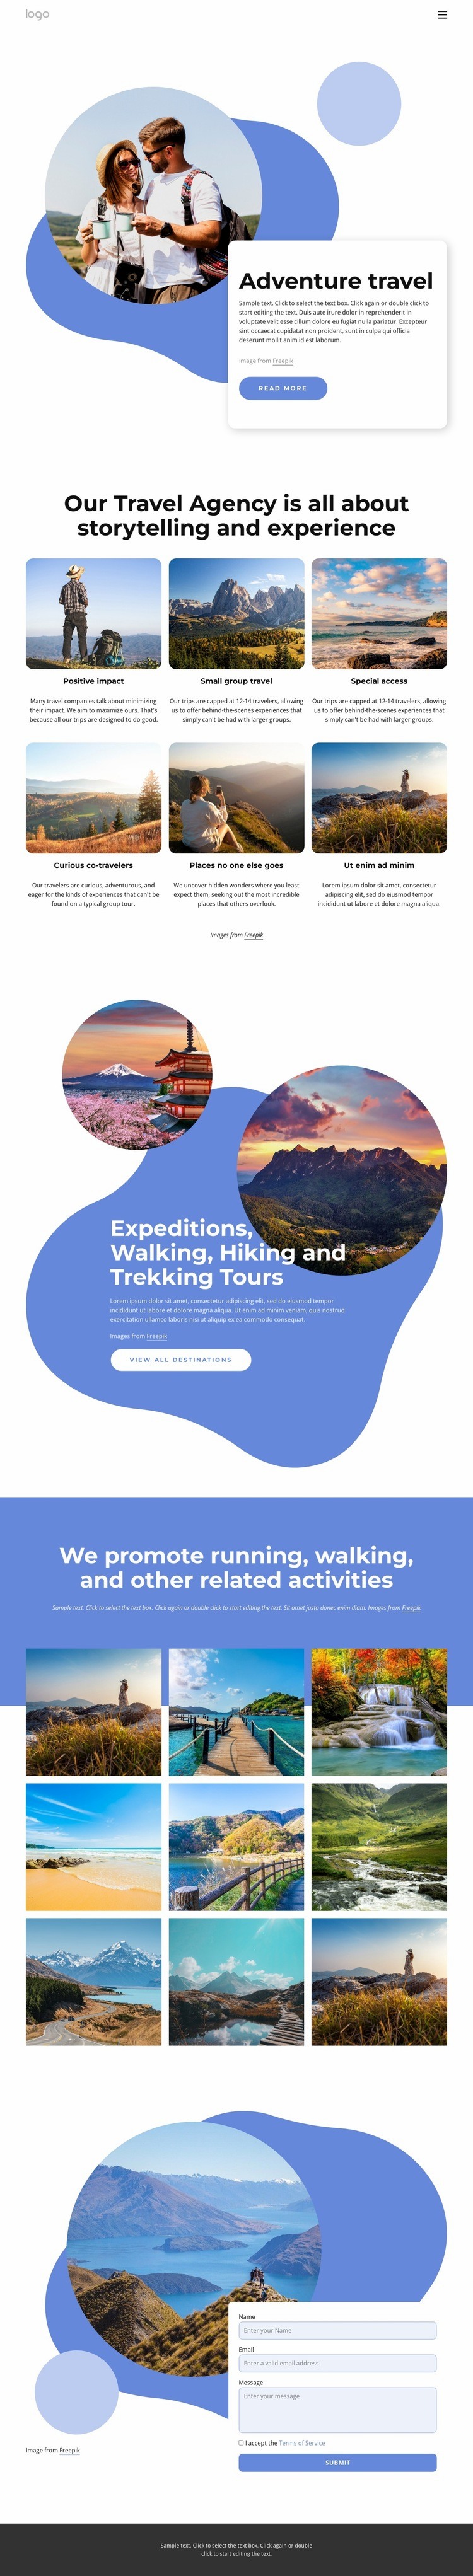 Agency specializing in luxury adventure travel Homepage Design